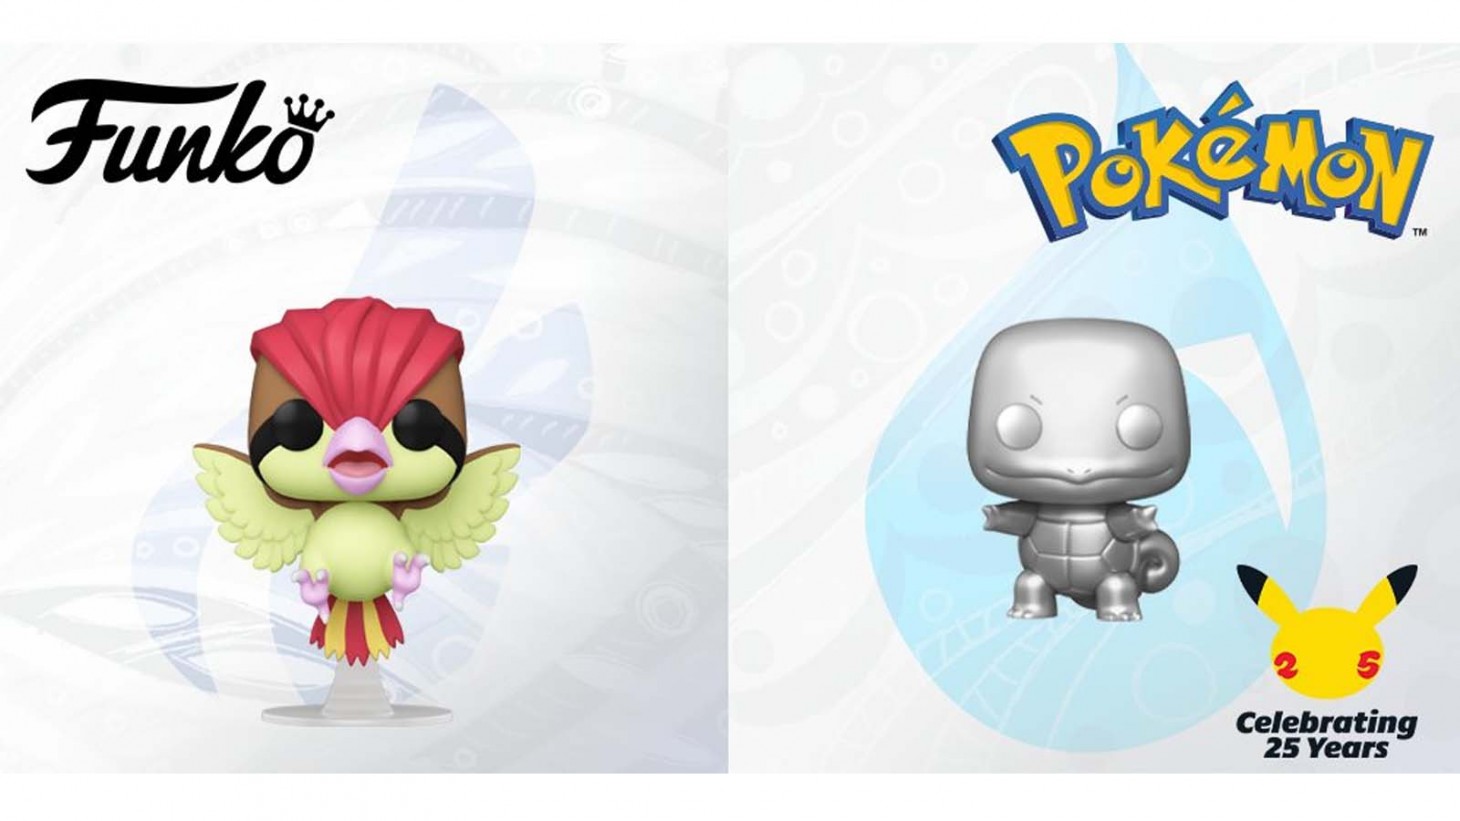 New Funko Pop! Pokémon Figures Featuring Charizard, Pidgeotto, and Squirtle  Are Available For Preorder - Game Informer